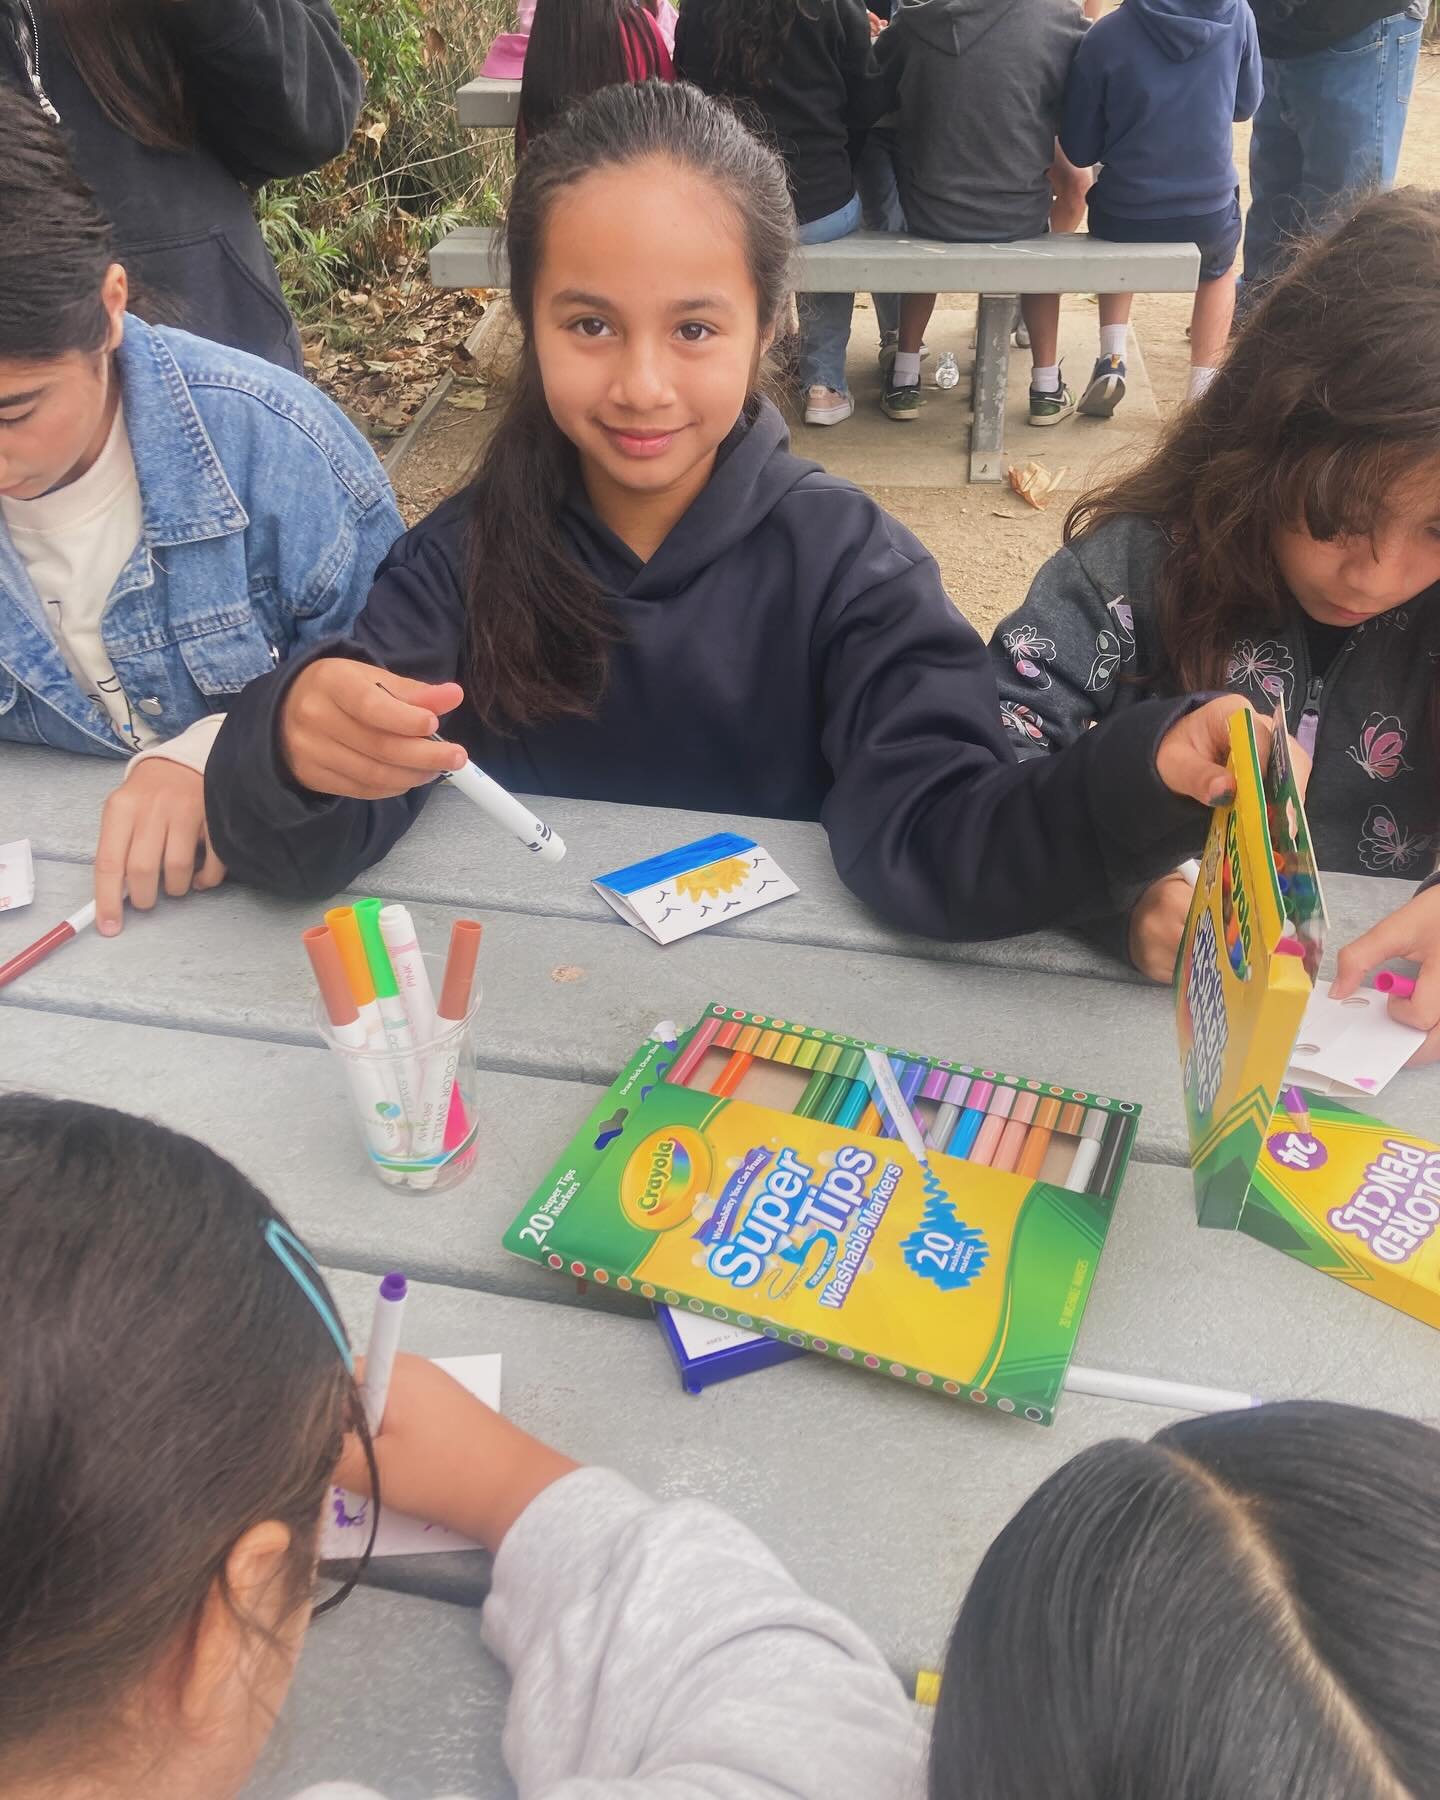 CLF&rsquo;s Summer Camp  for All summer camp program is already happening! Please consider #donating to our Summer Camp fundraiser-bring over 1,000 underserved youth in L.A. to our free program this year! #WeLoveYou &hearts;️🌞🕶️ #linkinbio